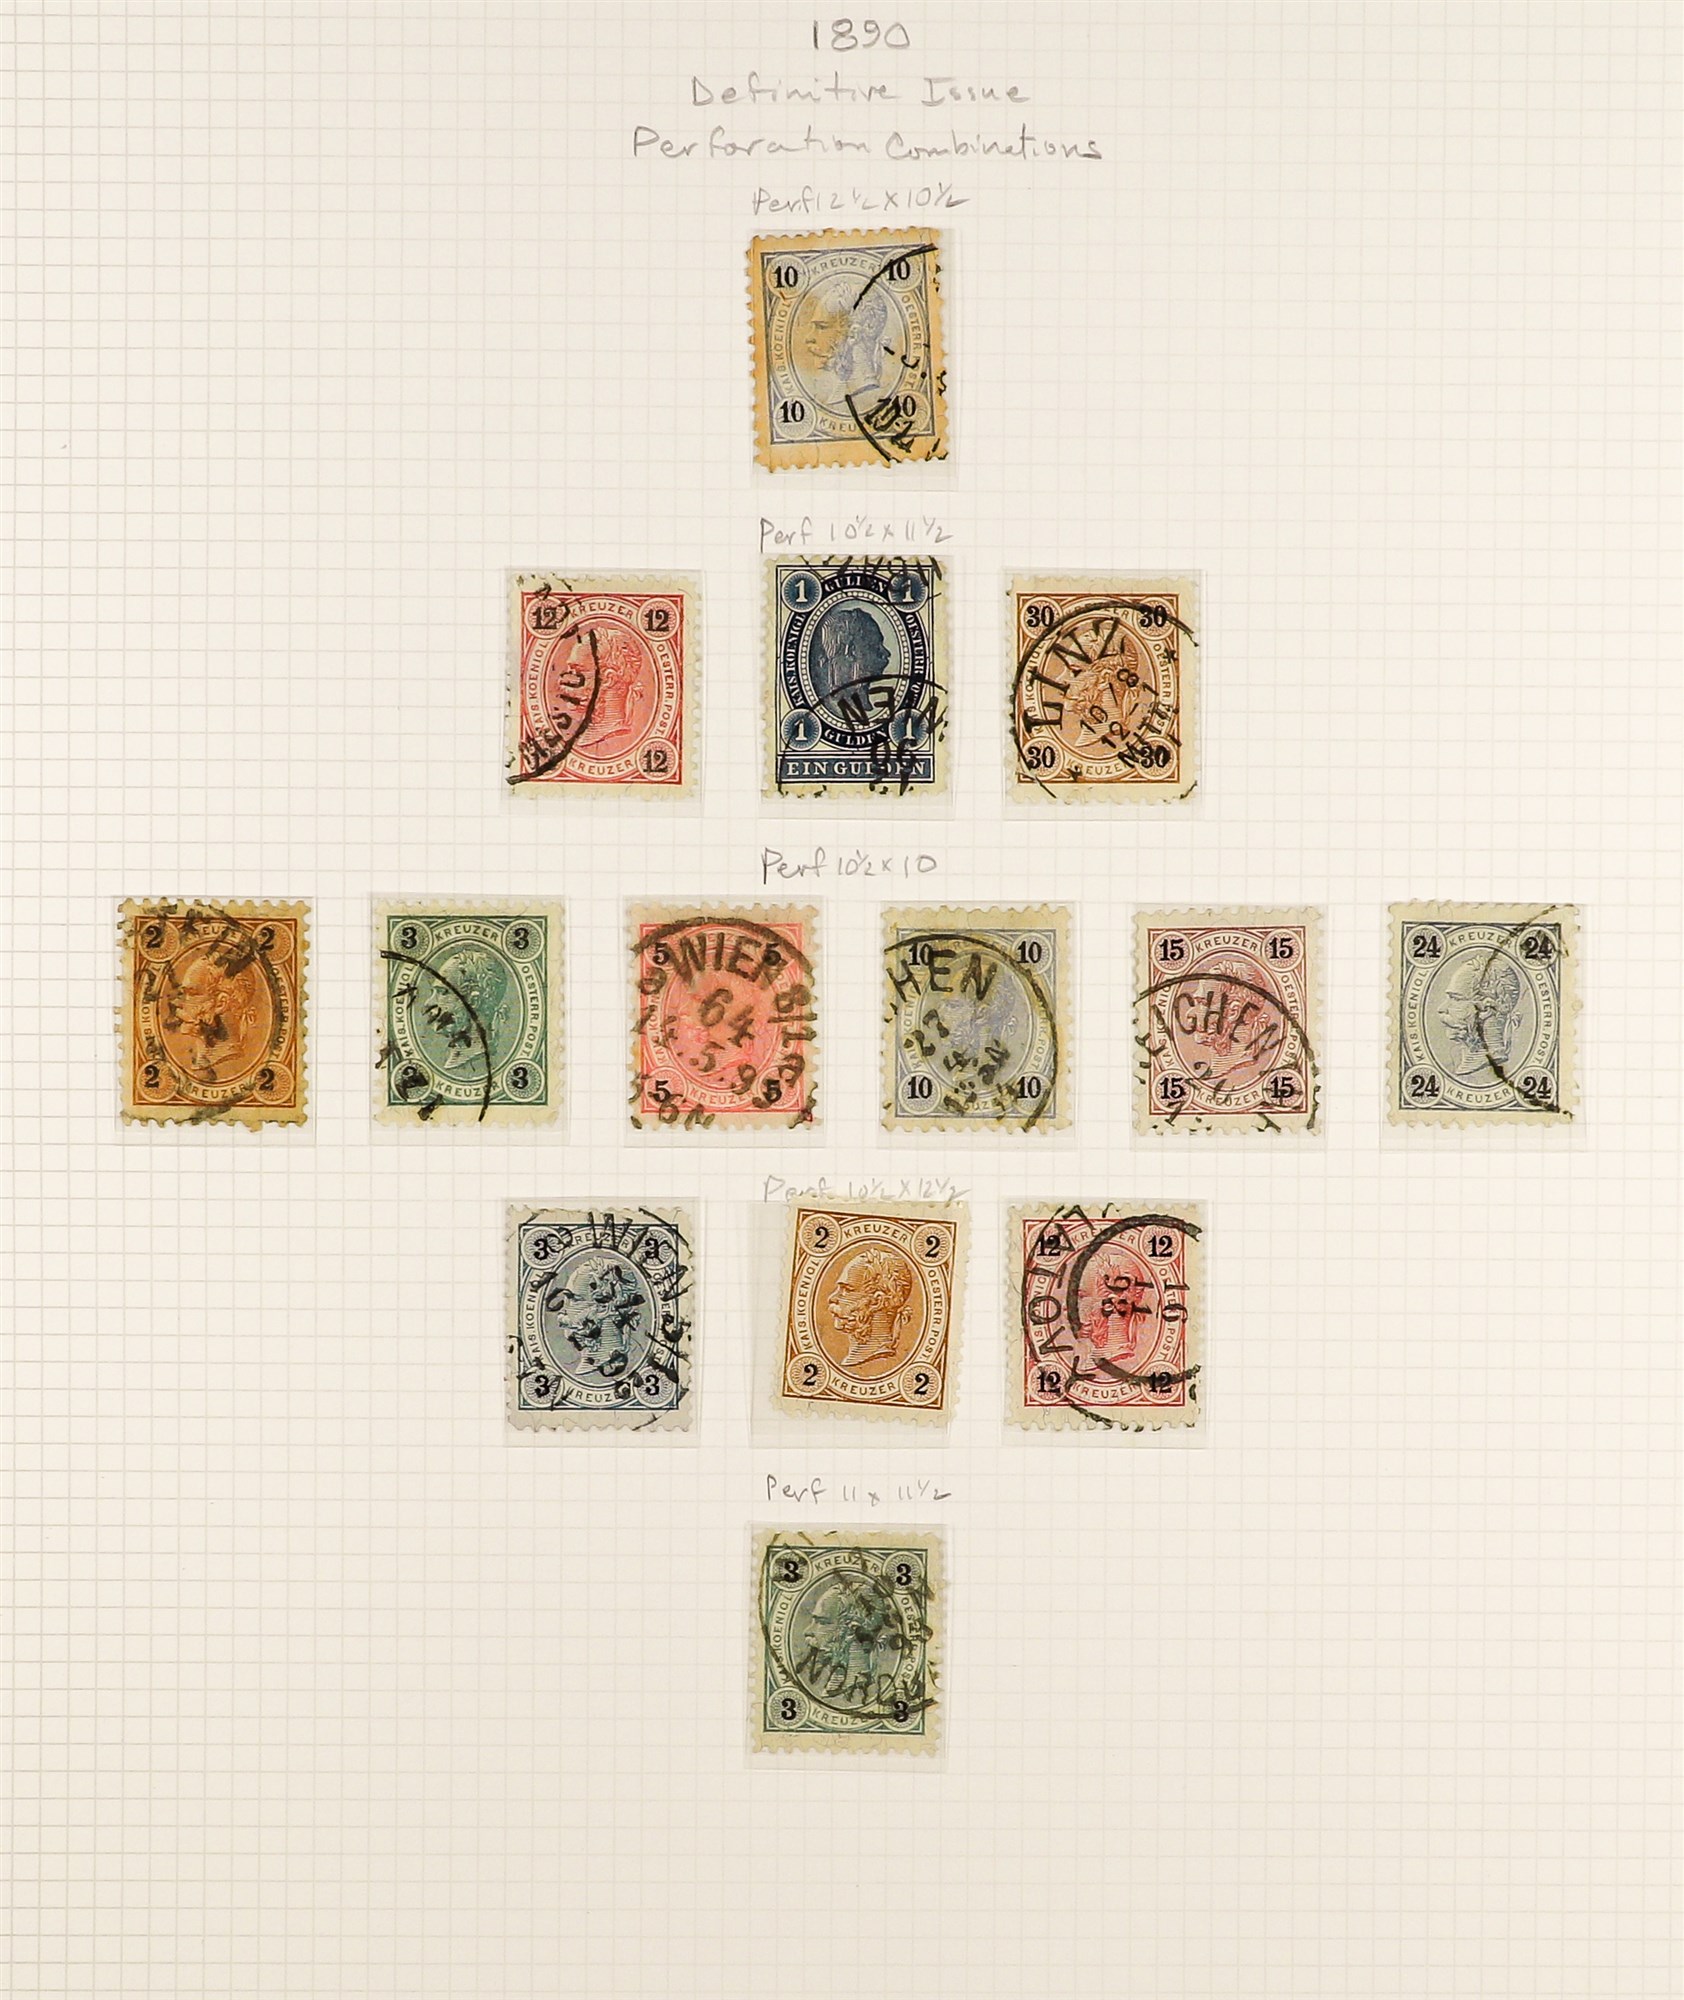 AUSTRIA 1890 - 1907 FRANZ JOSEF DEFINITIVES collection of over 300 stamps on album pages, semi- - Image 5 of 13